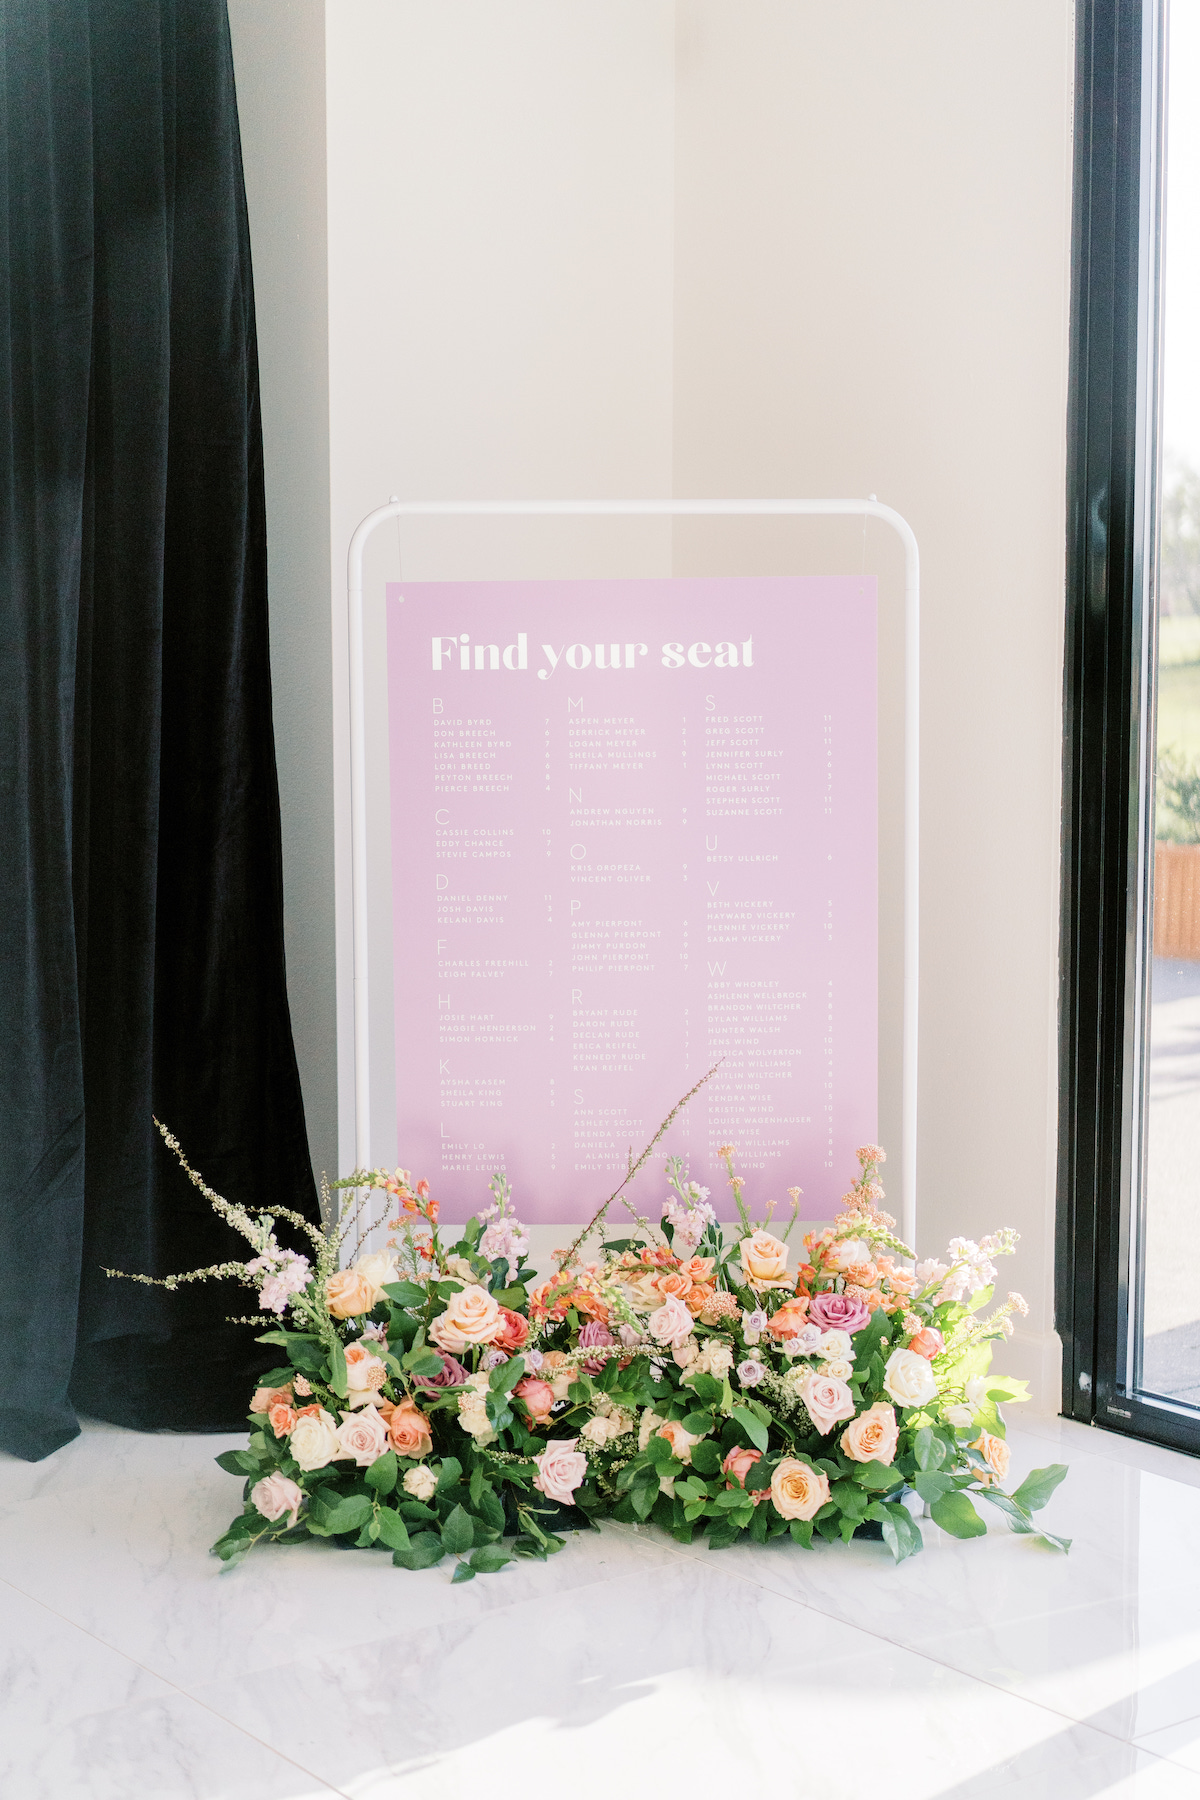 floral arrangements for seating charts